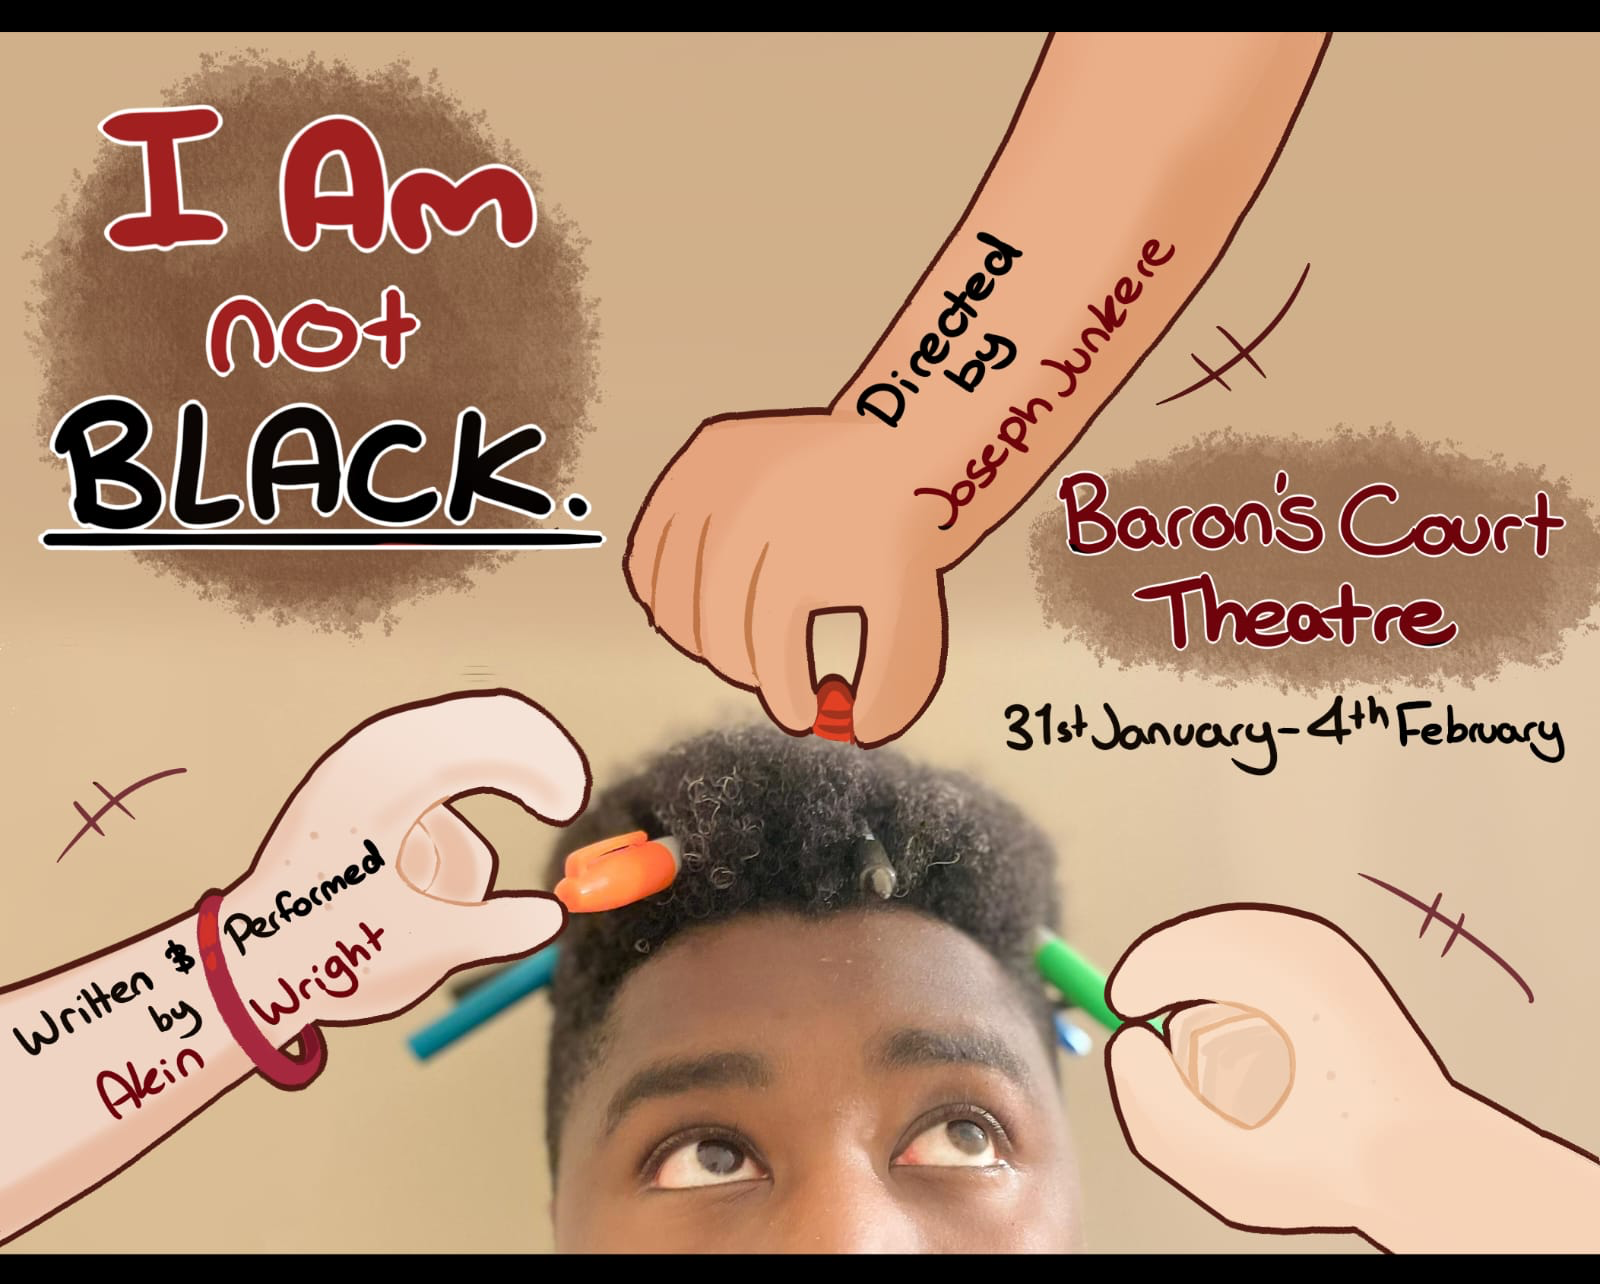 I Am Not Black by Akin Wright, Baron's Court Theatre